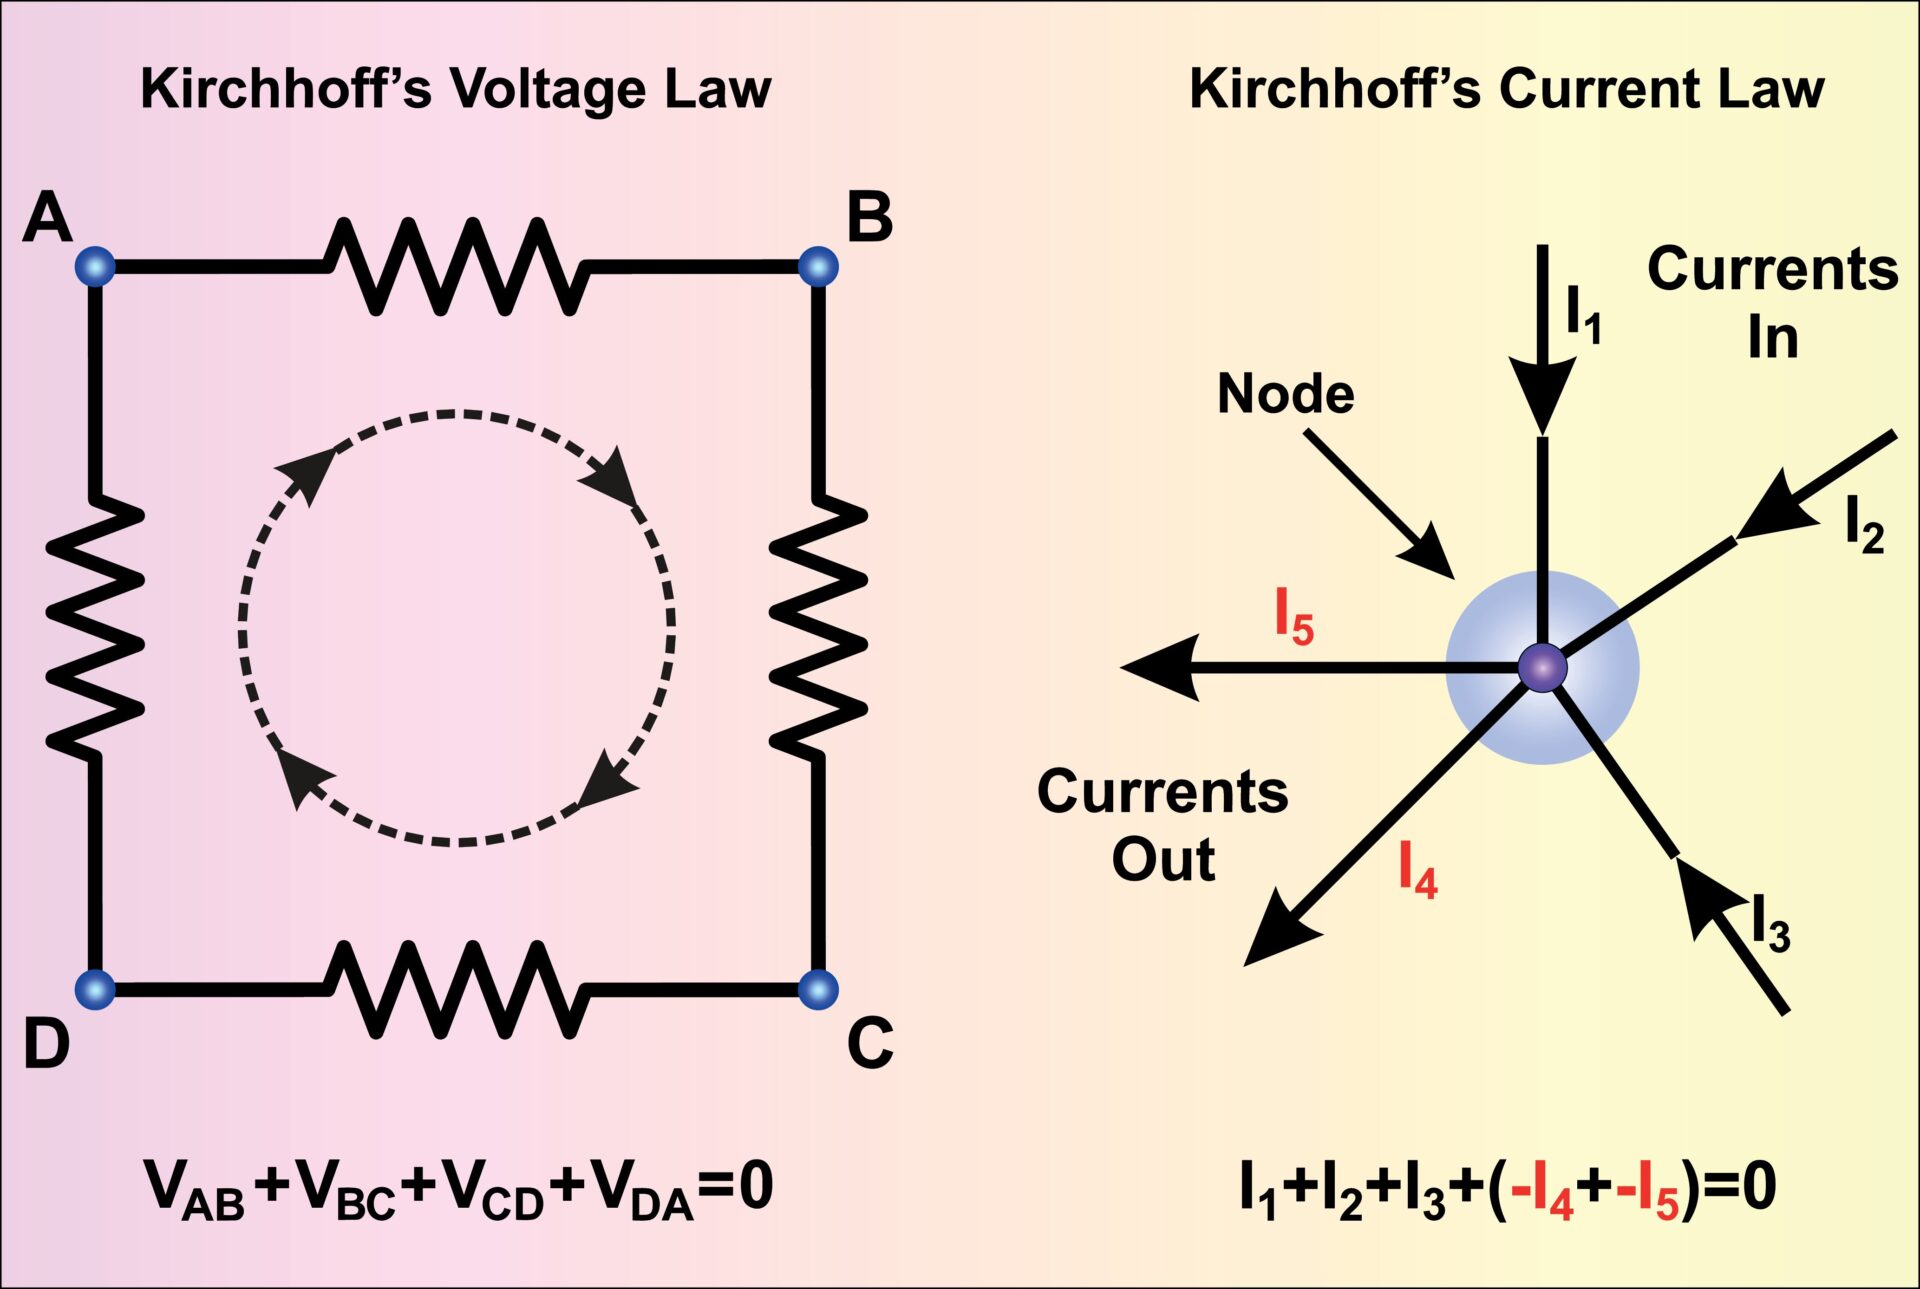 9-astounding-facts-about-kirchhoffs-circuit-laws-kirchhoffs-voltage-law-and-kirchhoffs-current-law